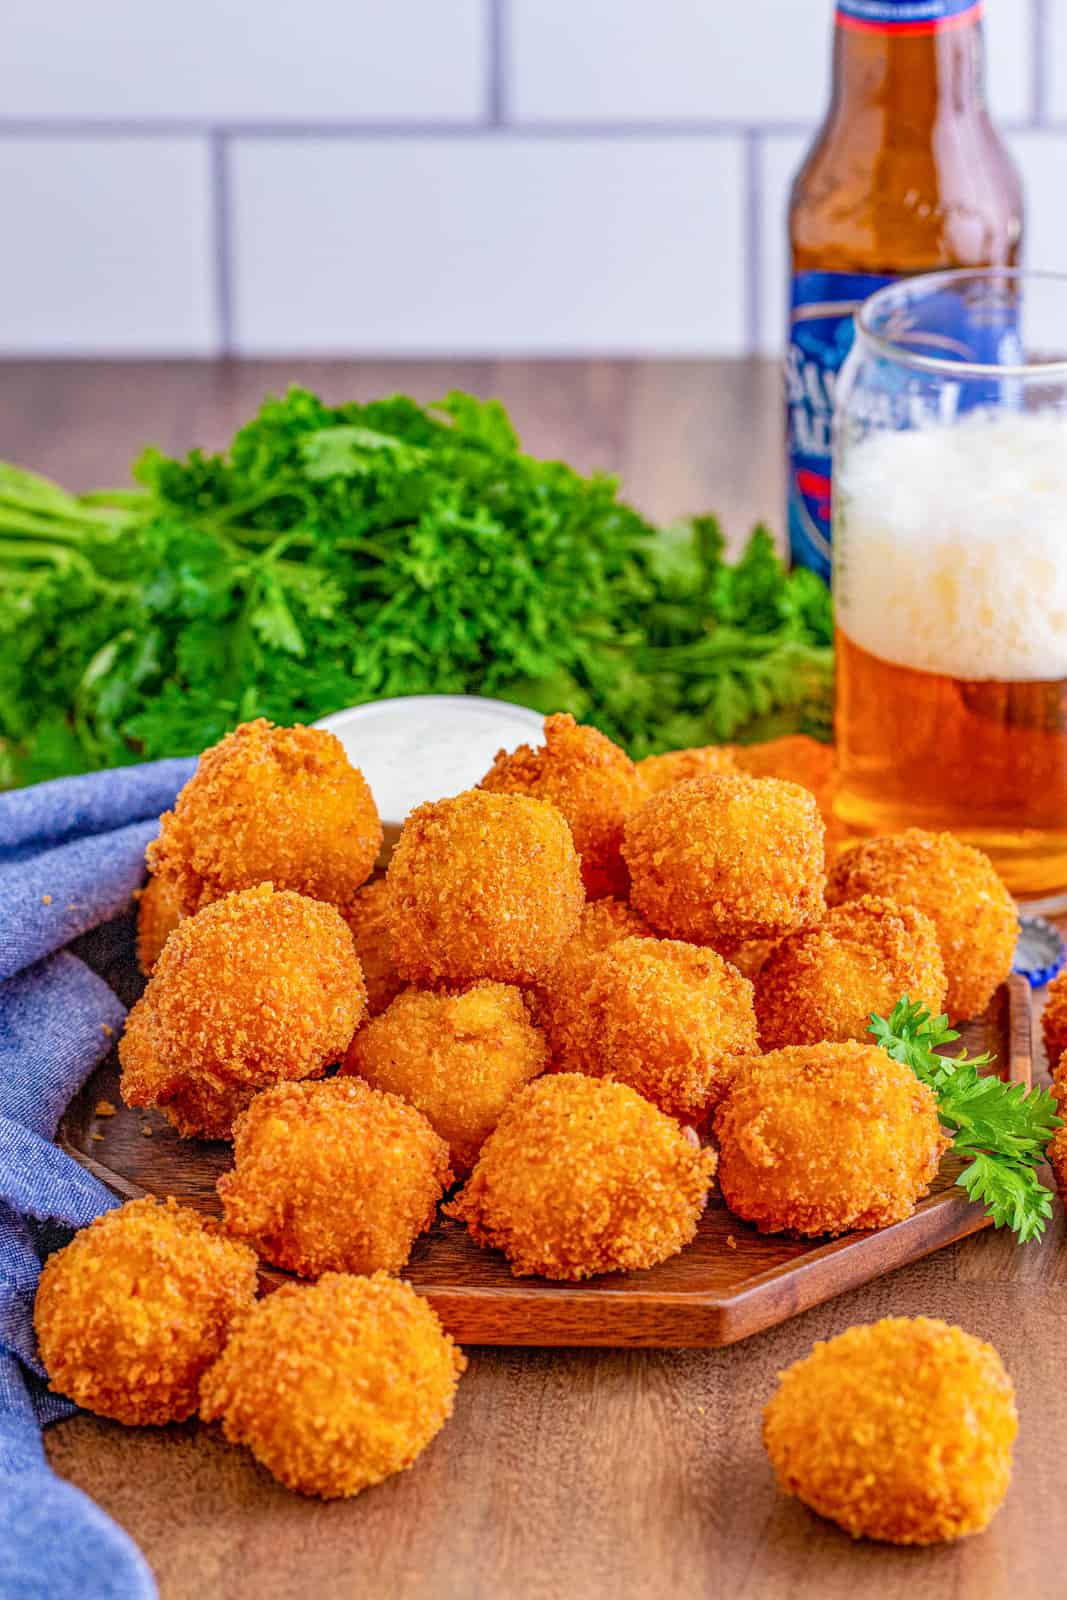 Fried Mac and Cheese Balls on wooden platter with beer in background.